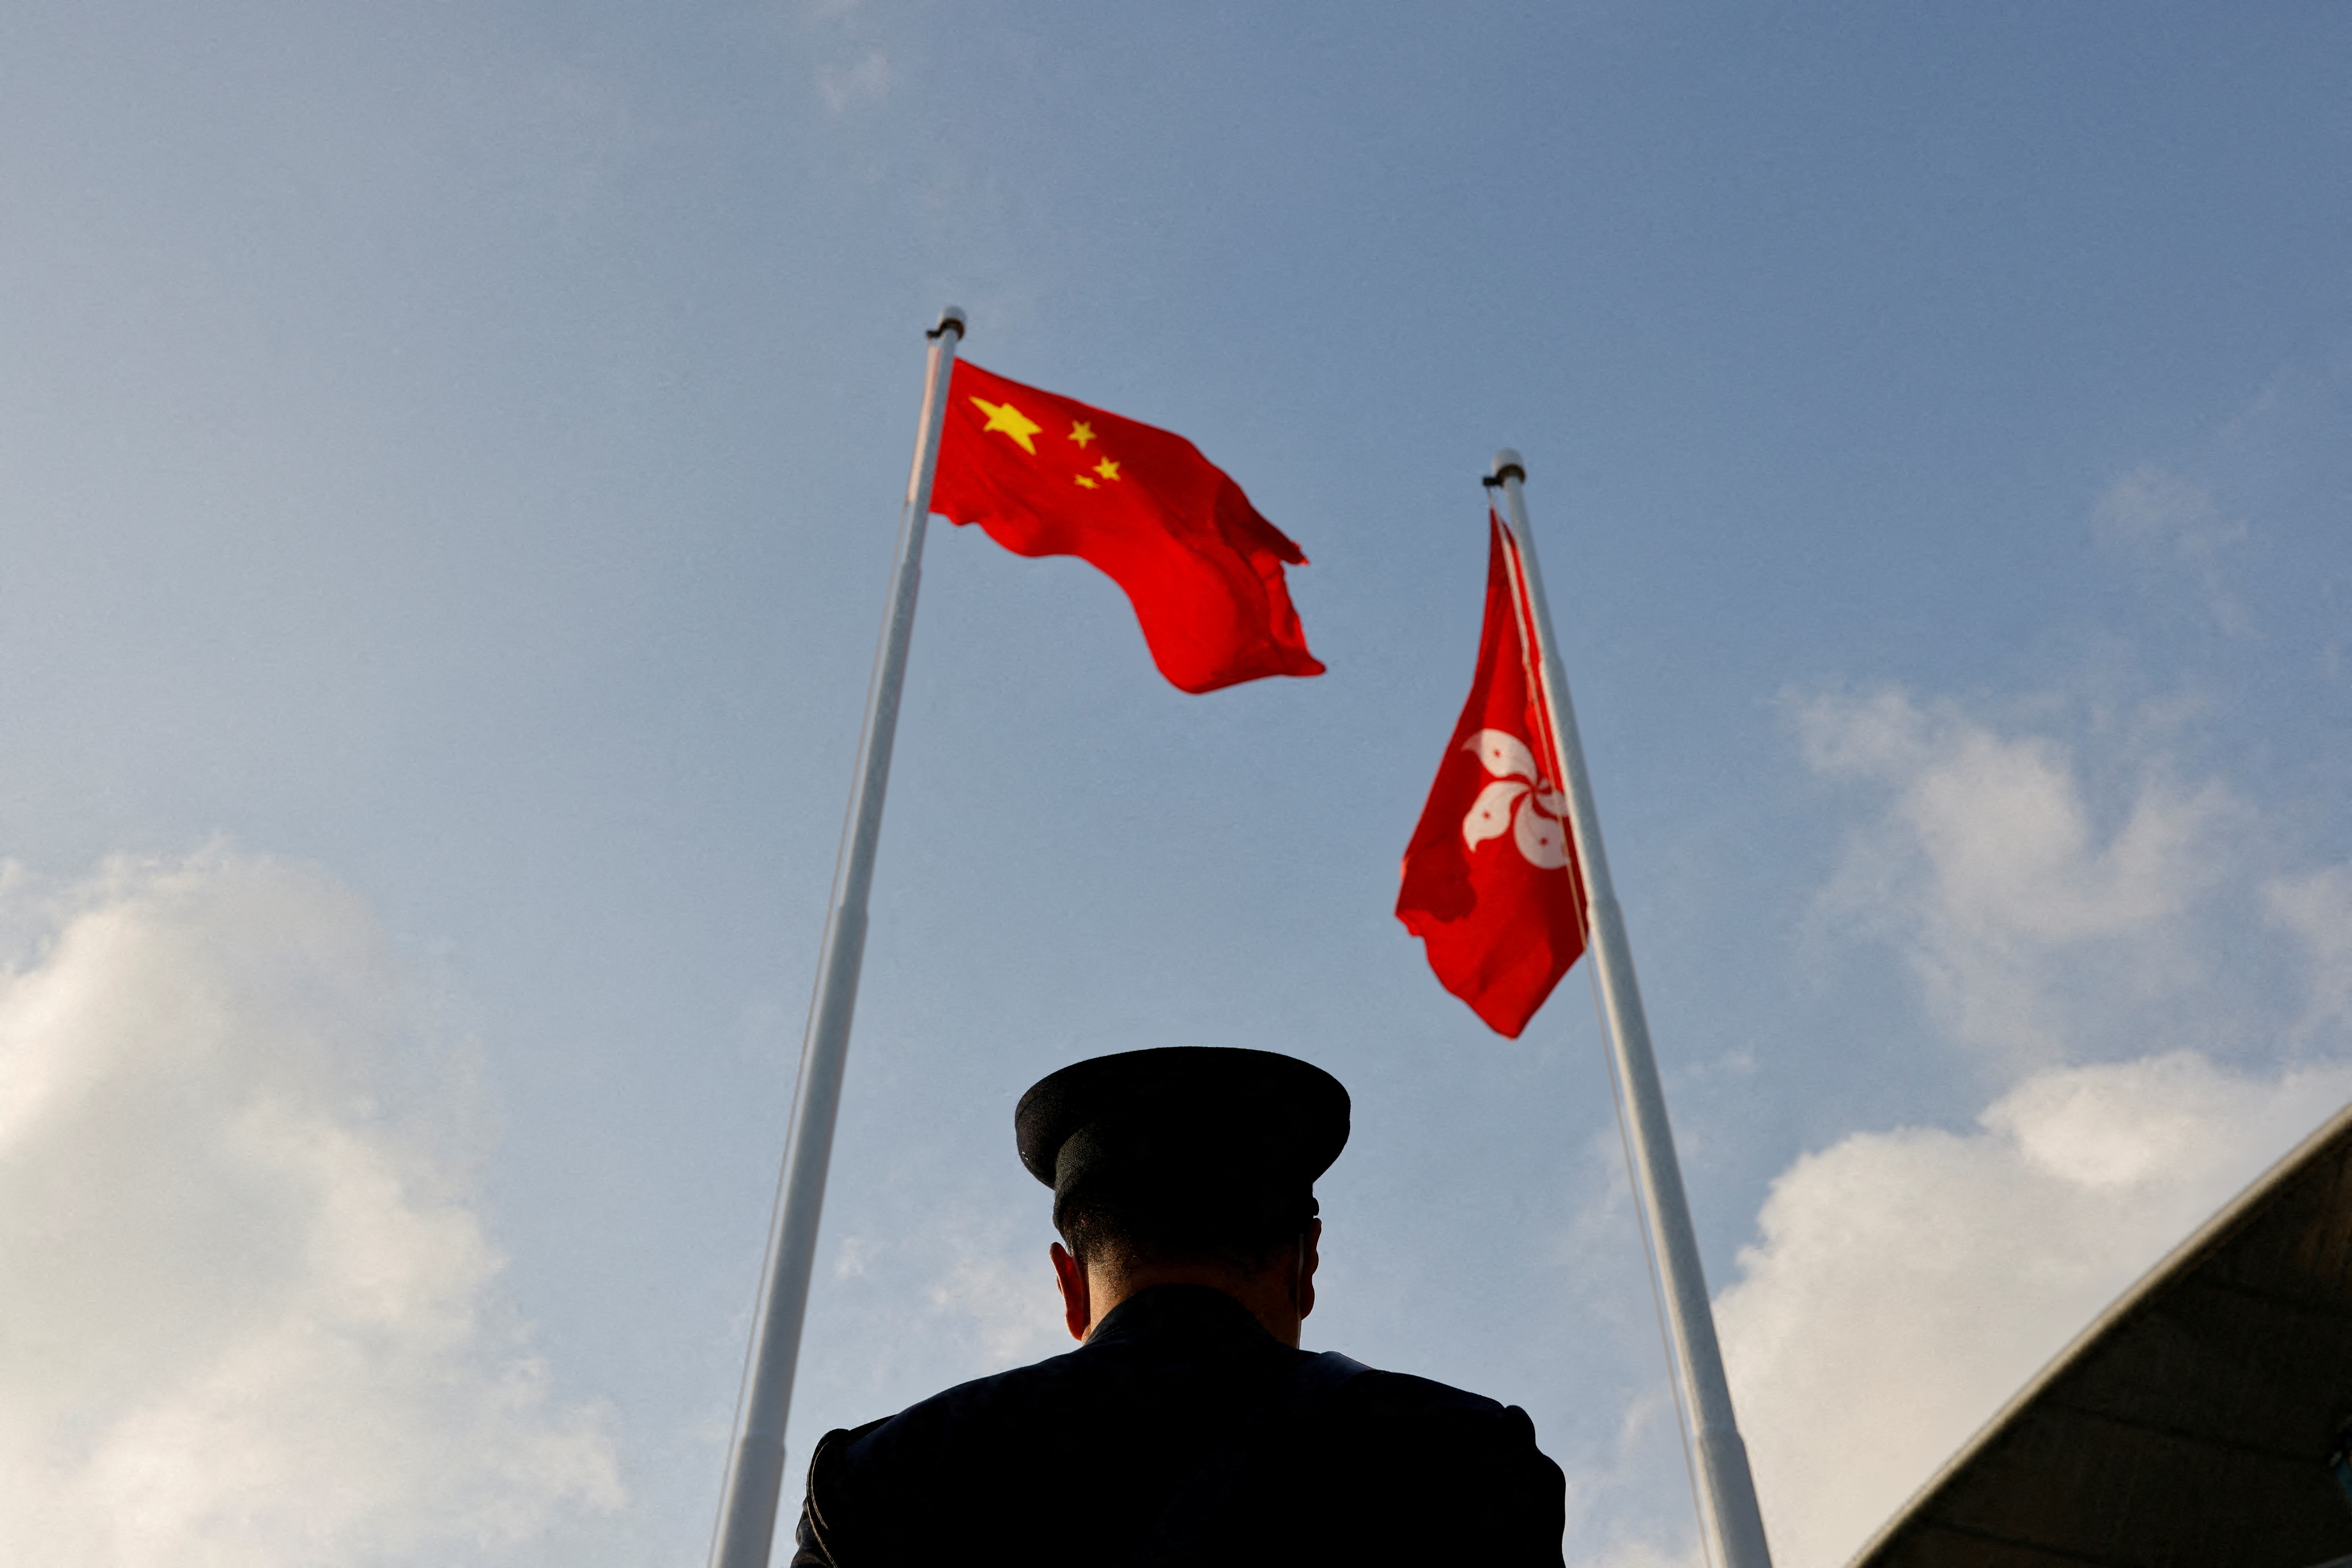 A police officer stands guard below China and Hong Kong flags during a flag raising ceremony, a week ahead of the Legislative Council election in Hong Kong